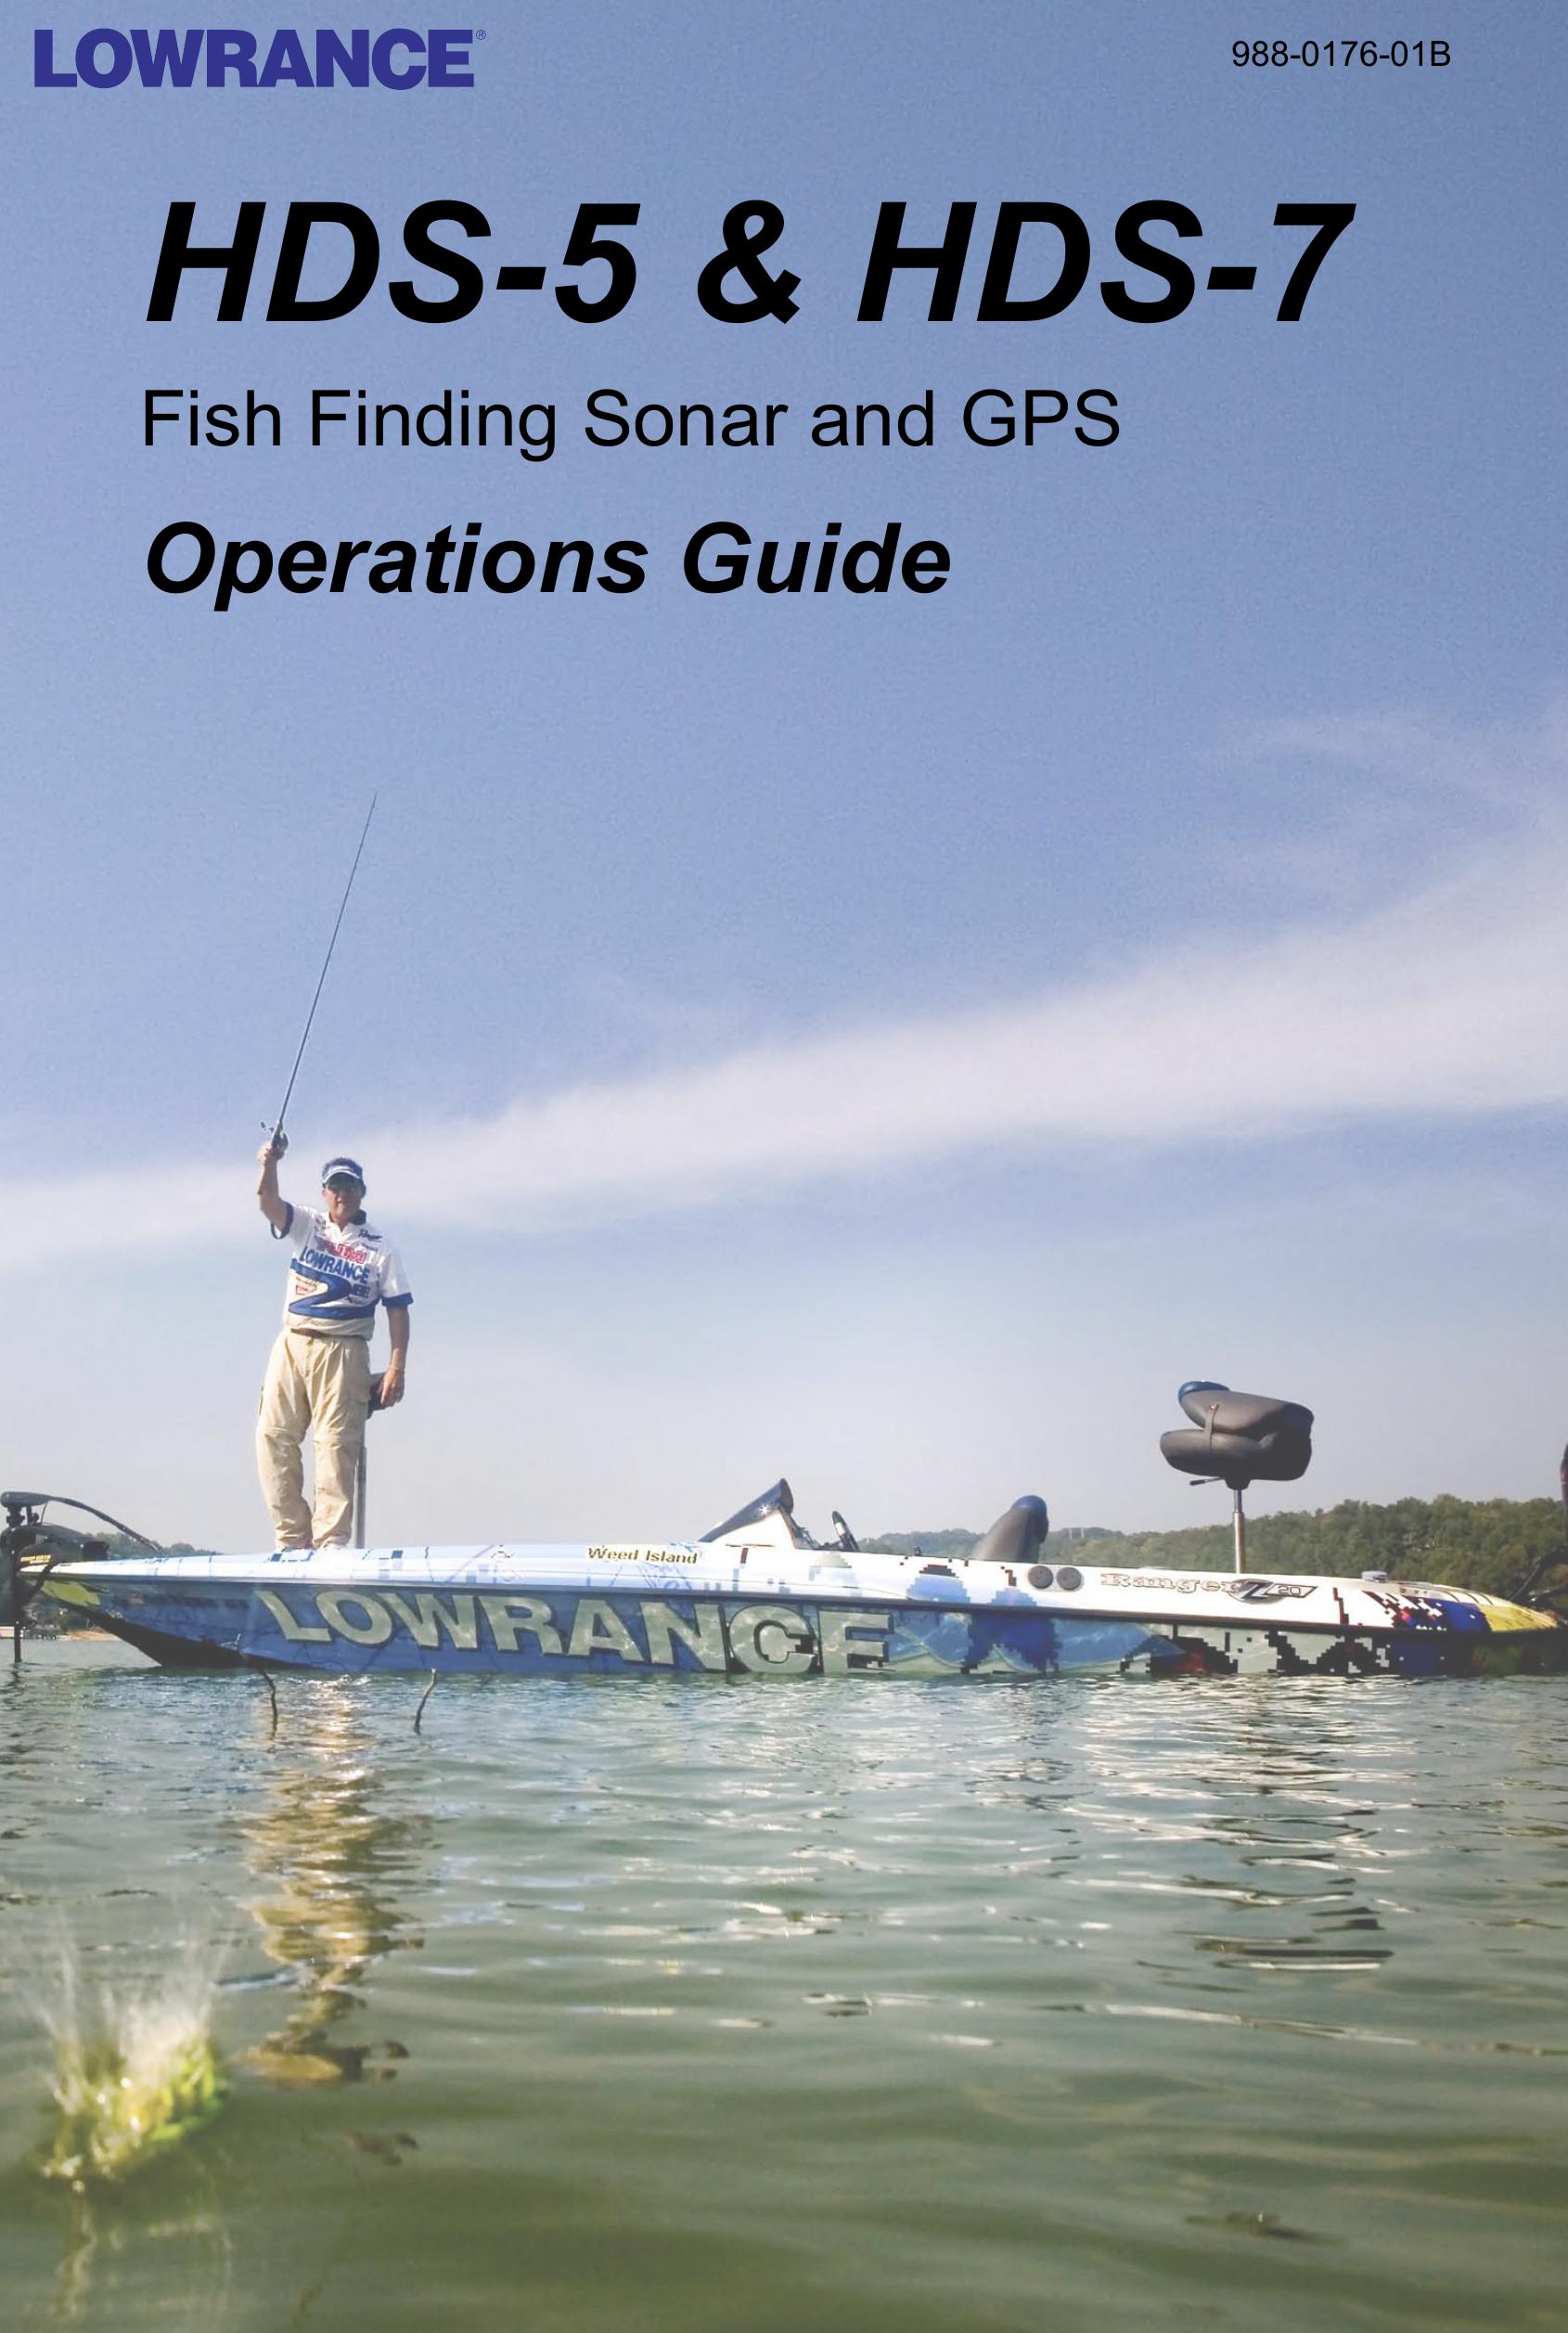 Lowrance electronic HDS-5 Fish Finder User Manual